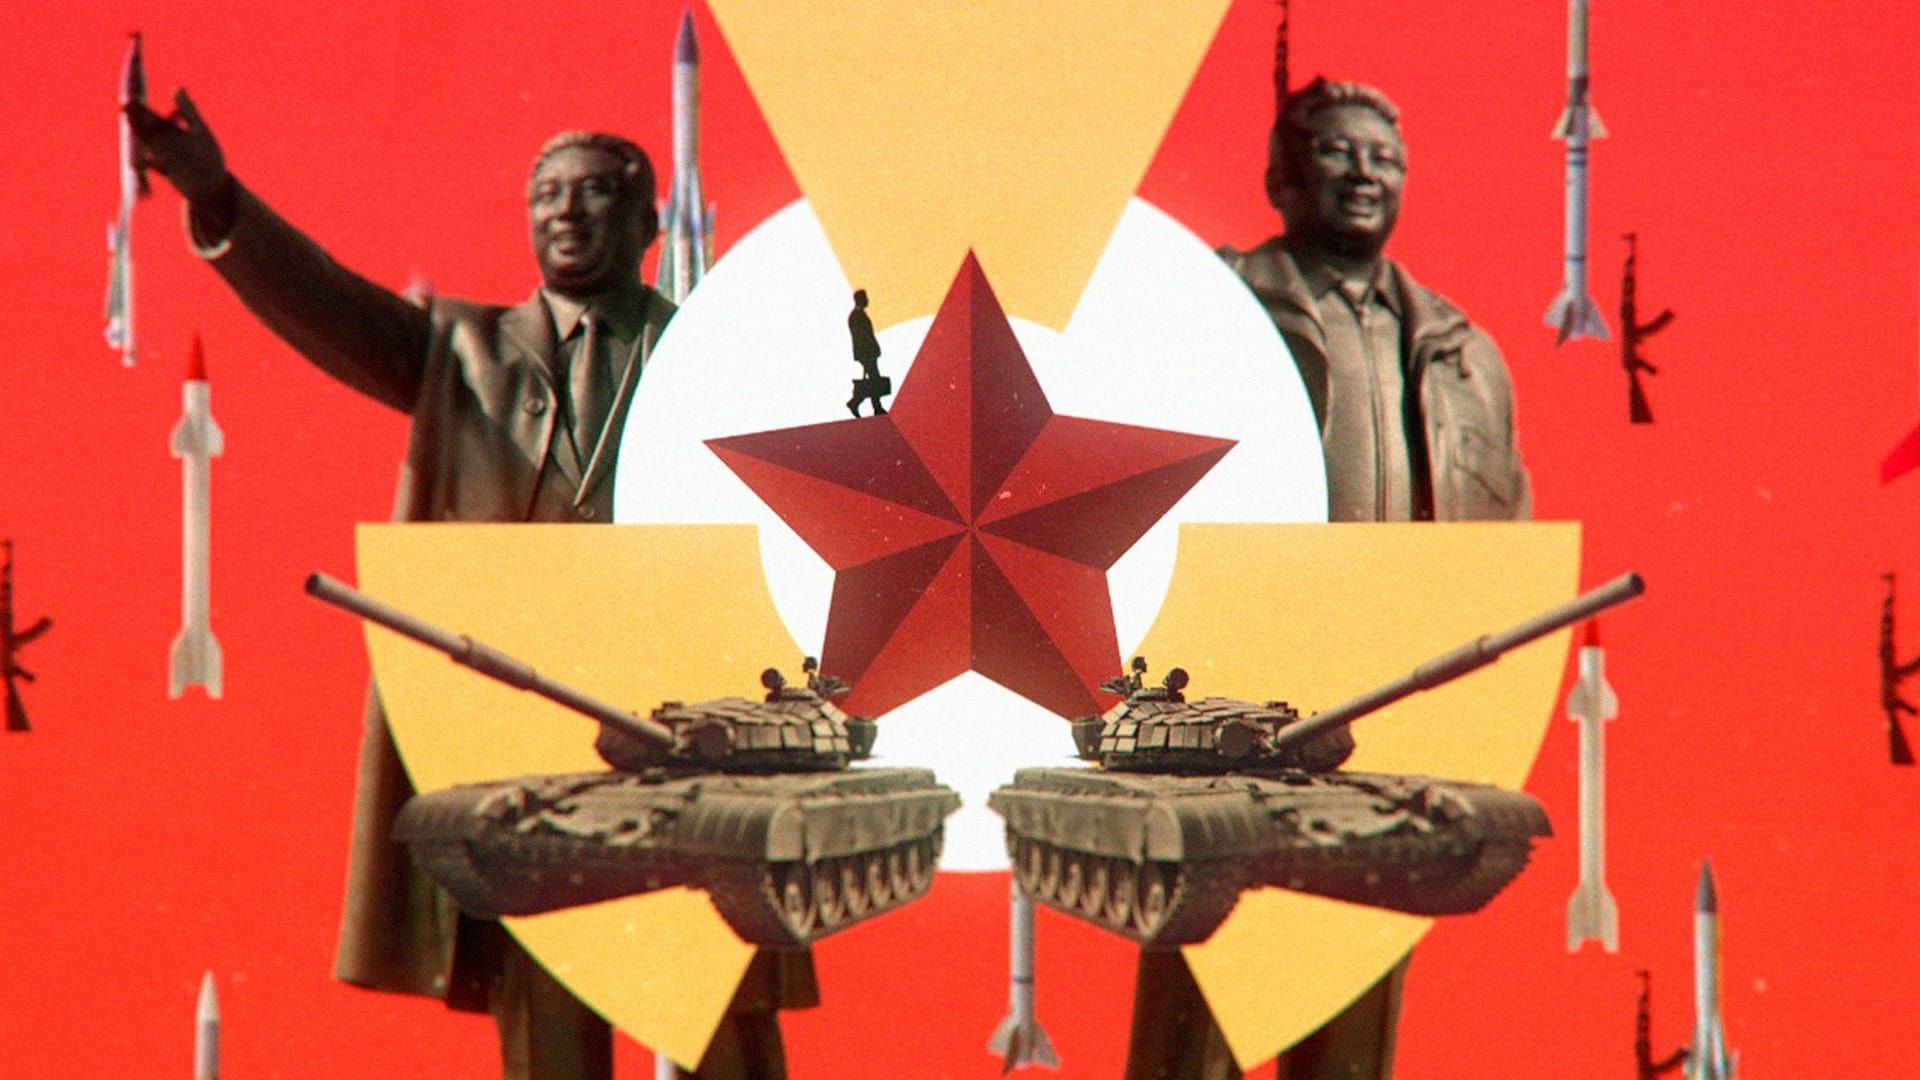 North Korea: Inside the Mind of a Dictator background